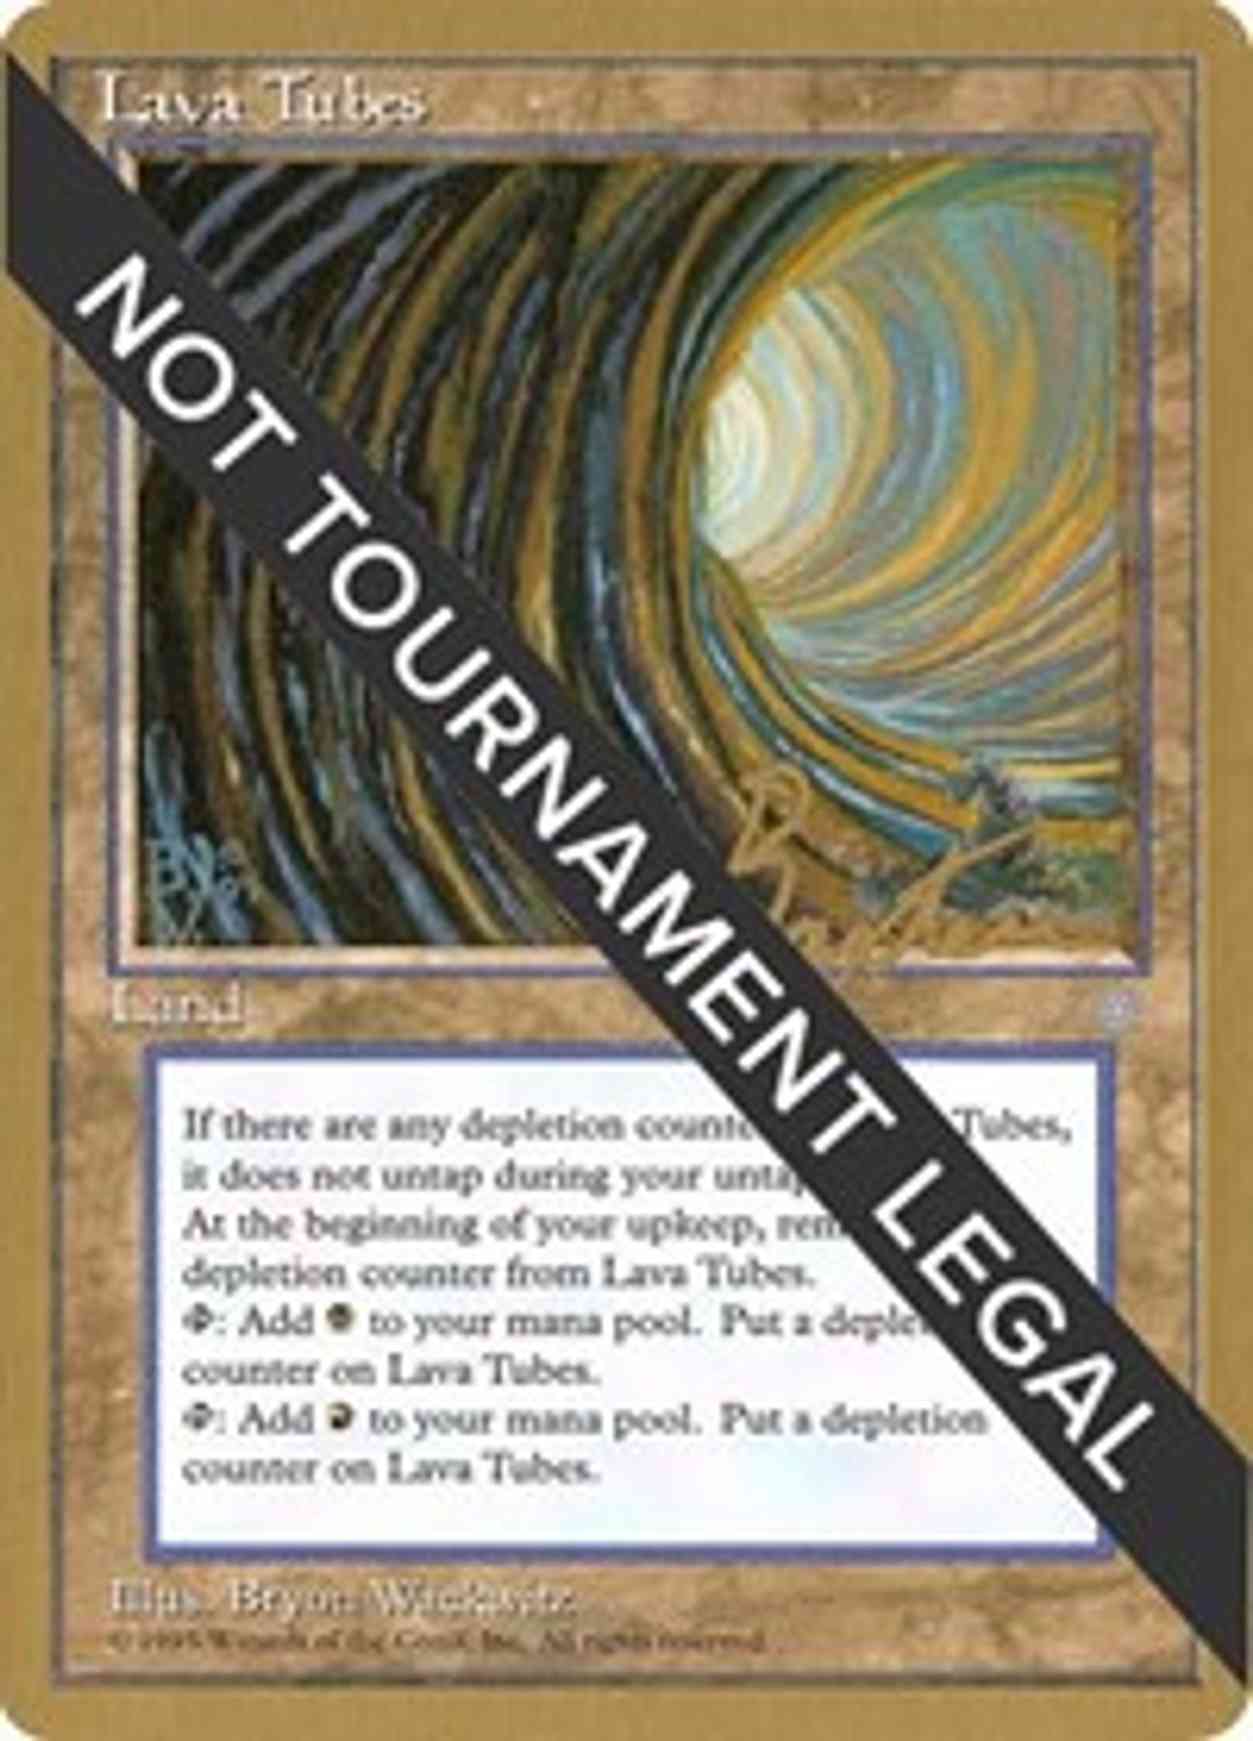 Lava Tubes - 1996 George Baxter (ICE) magic card front